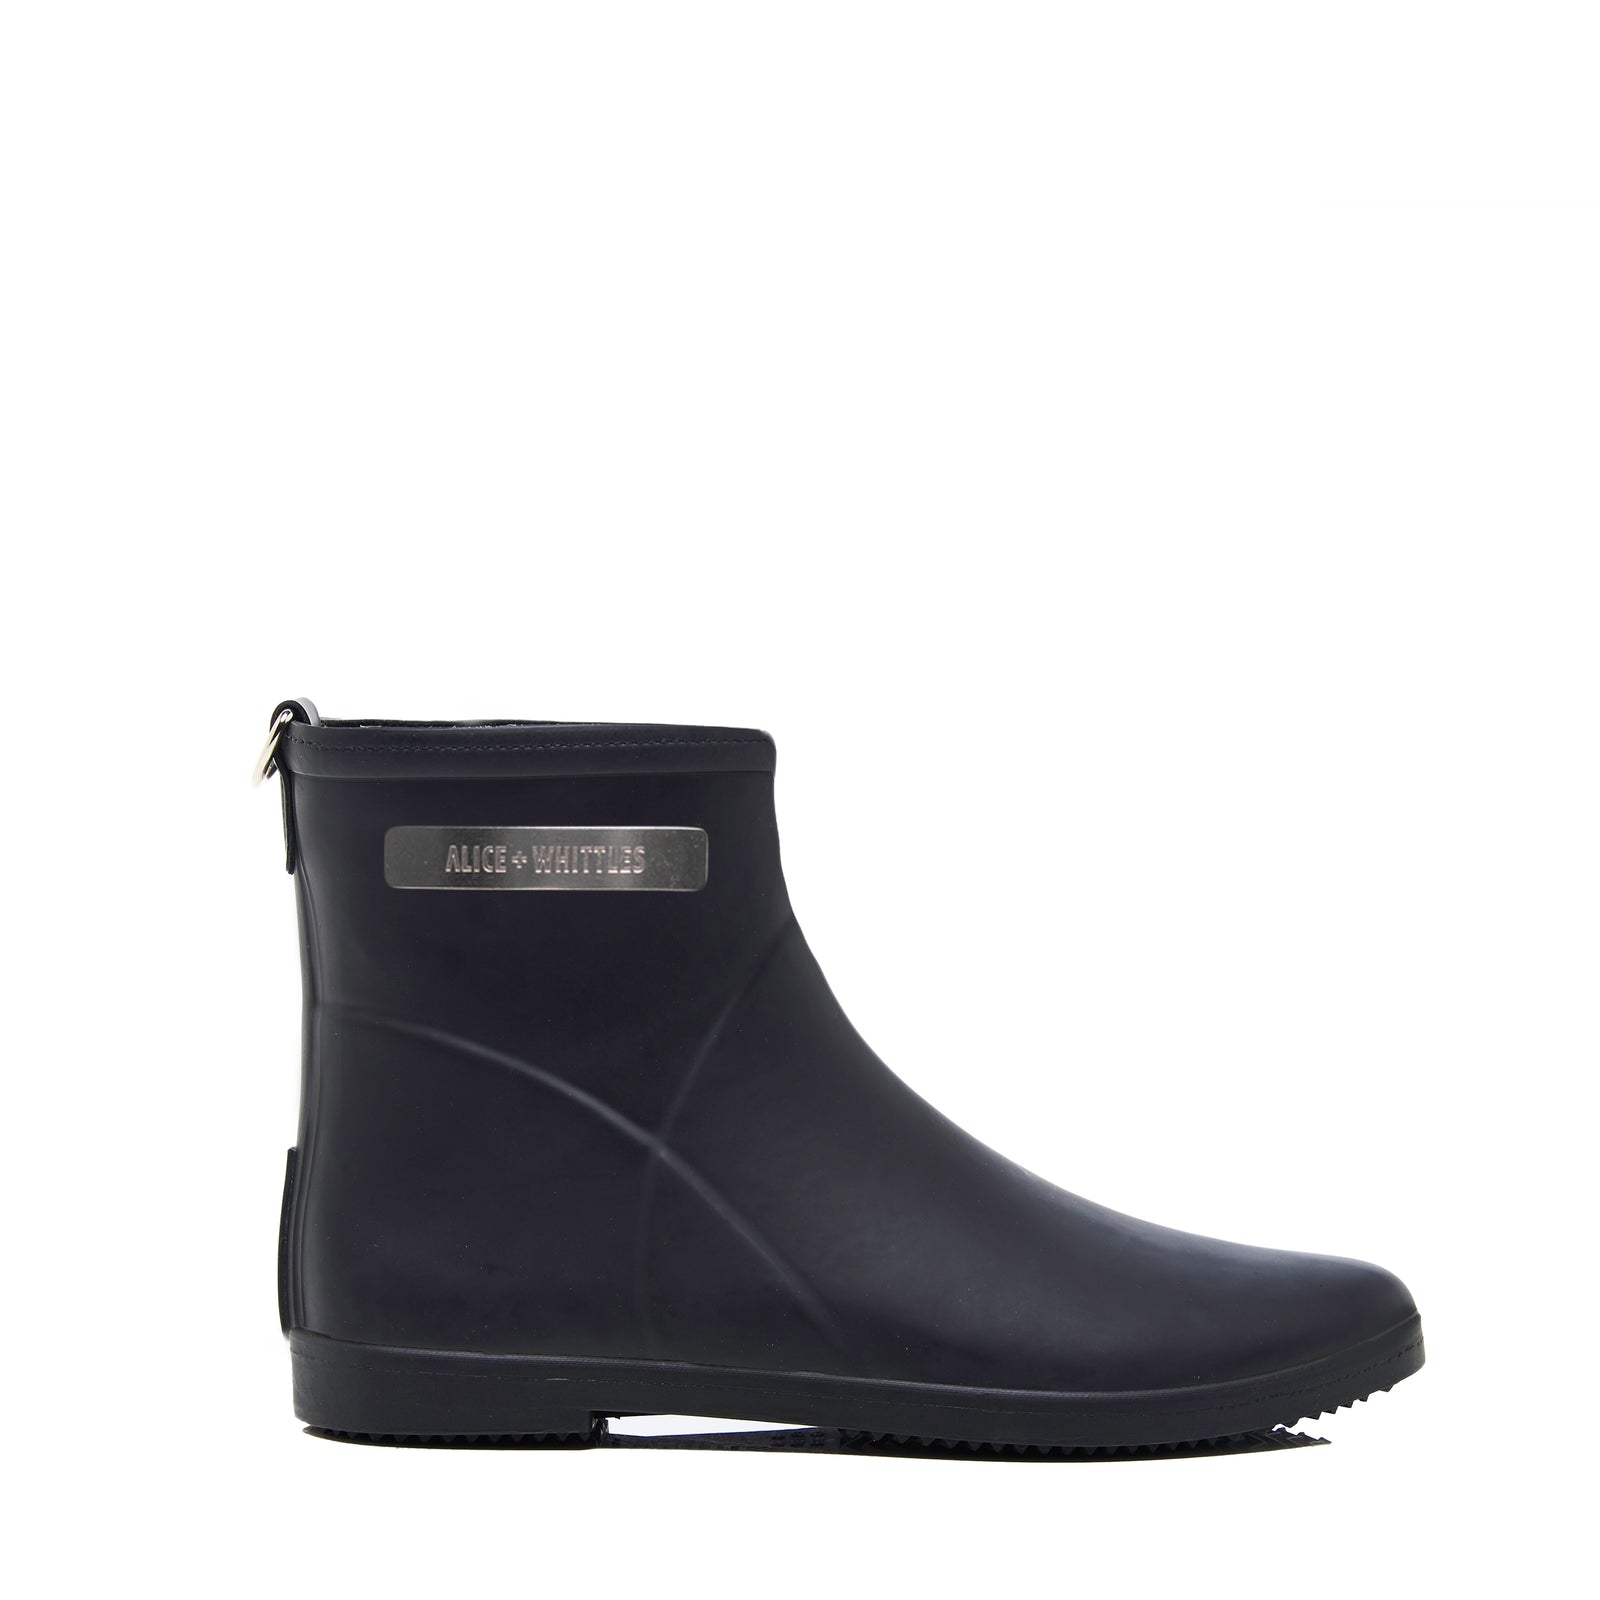 classic black ankle boots